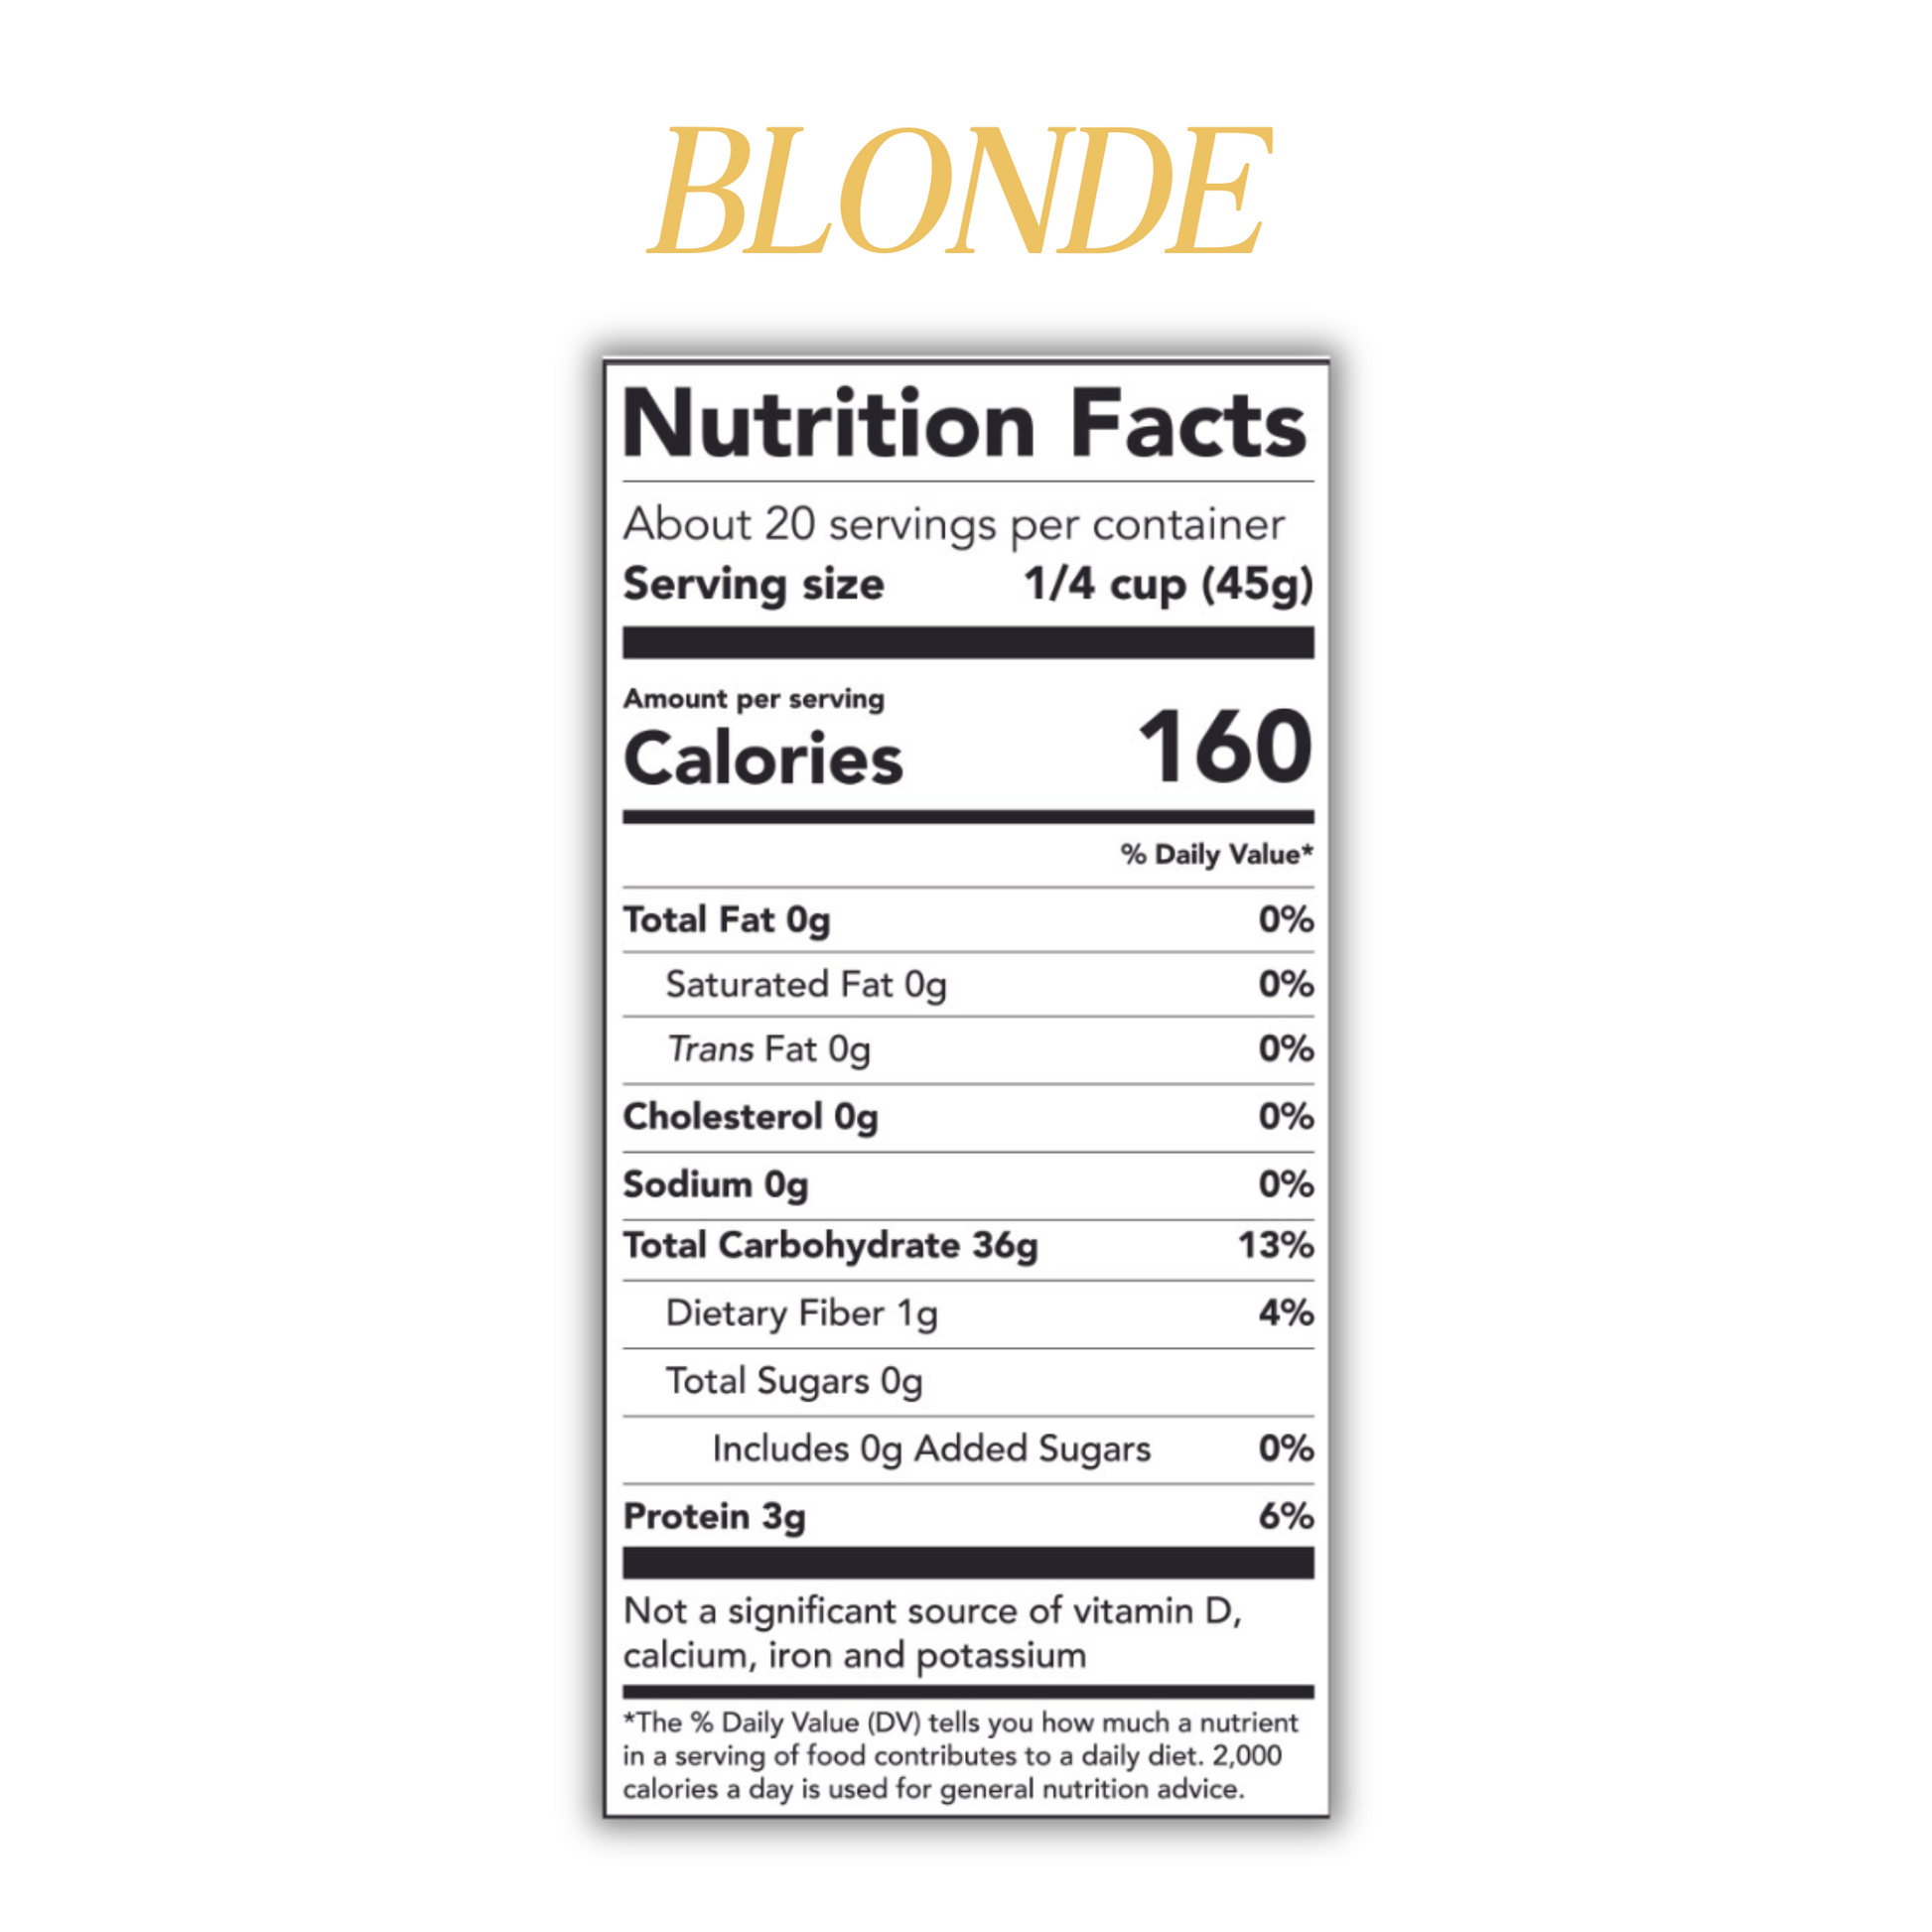 Chico Rice's Blonde Rice | Nutrition Facts-Plain